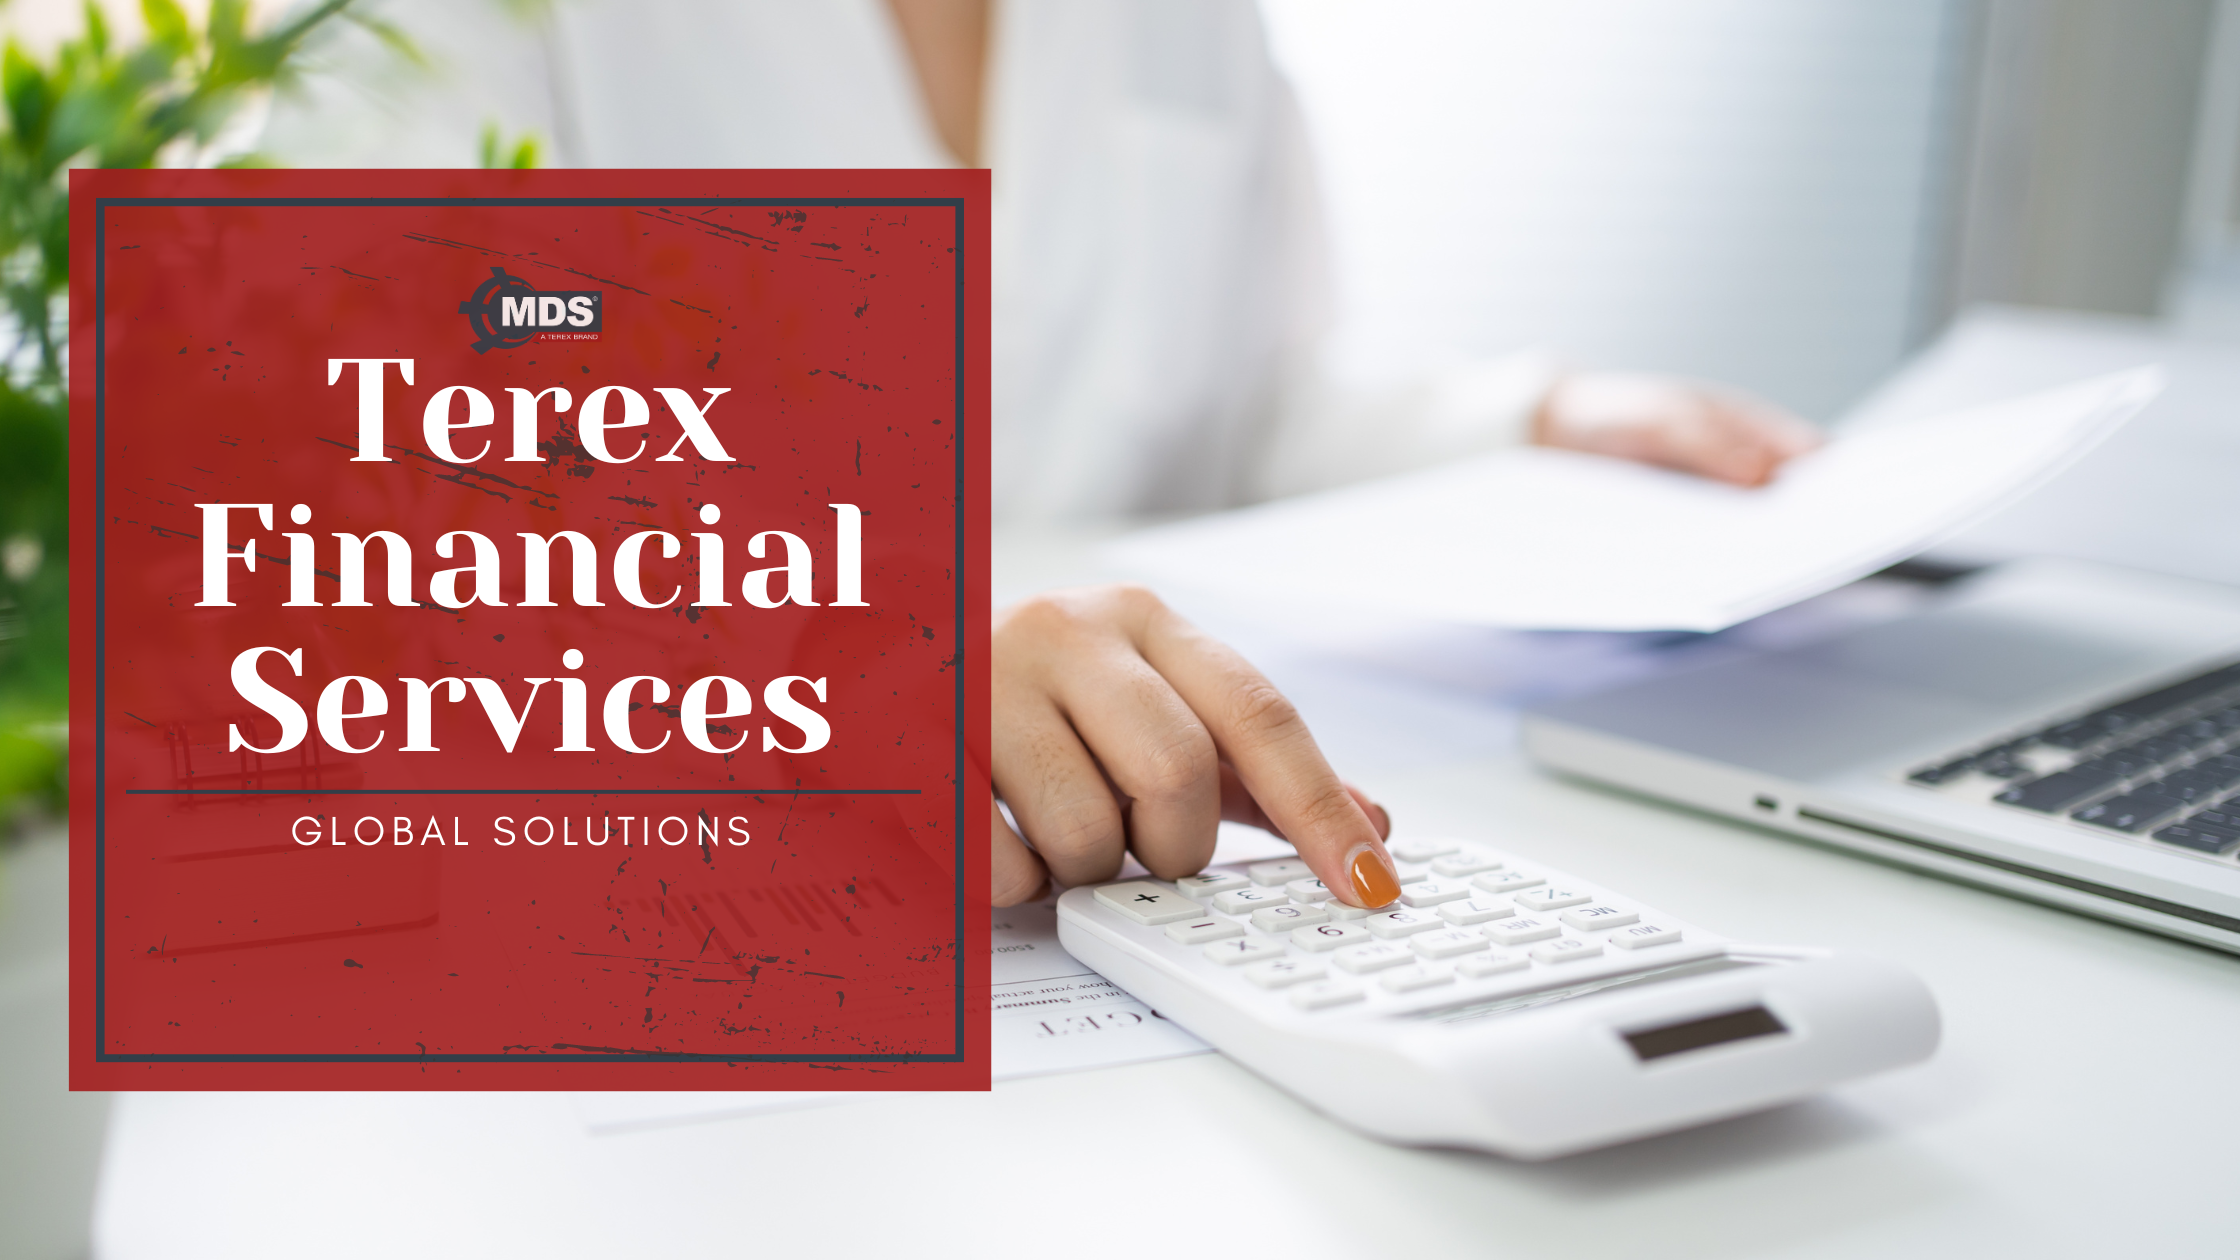 mds terex financial services